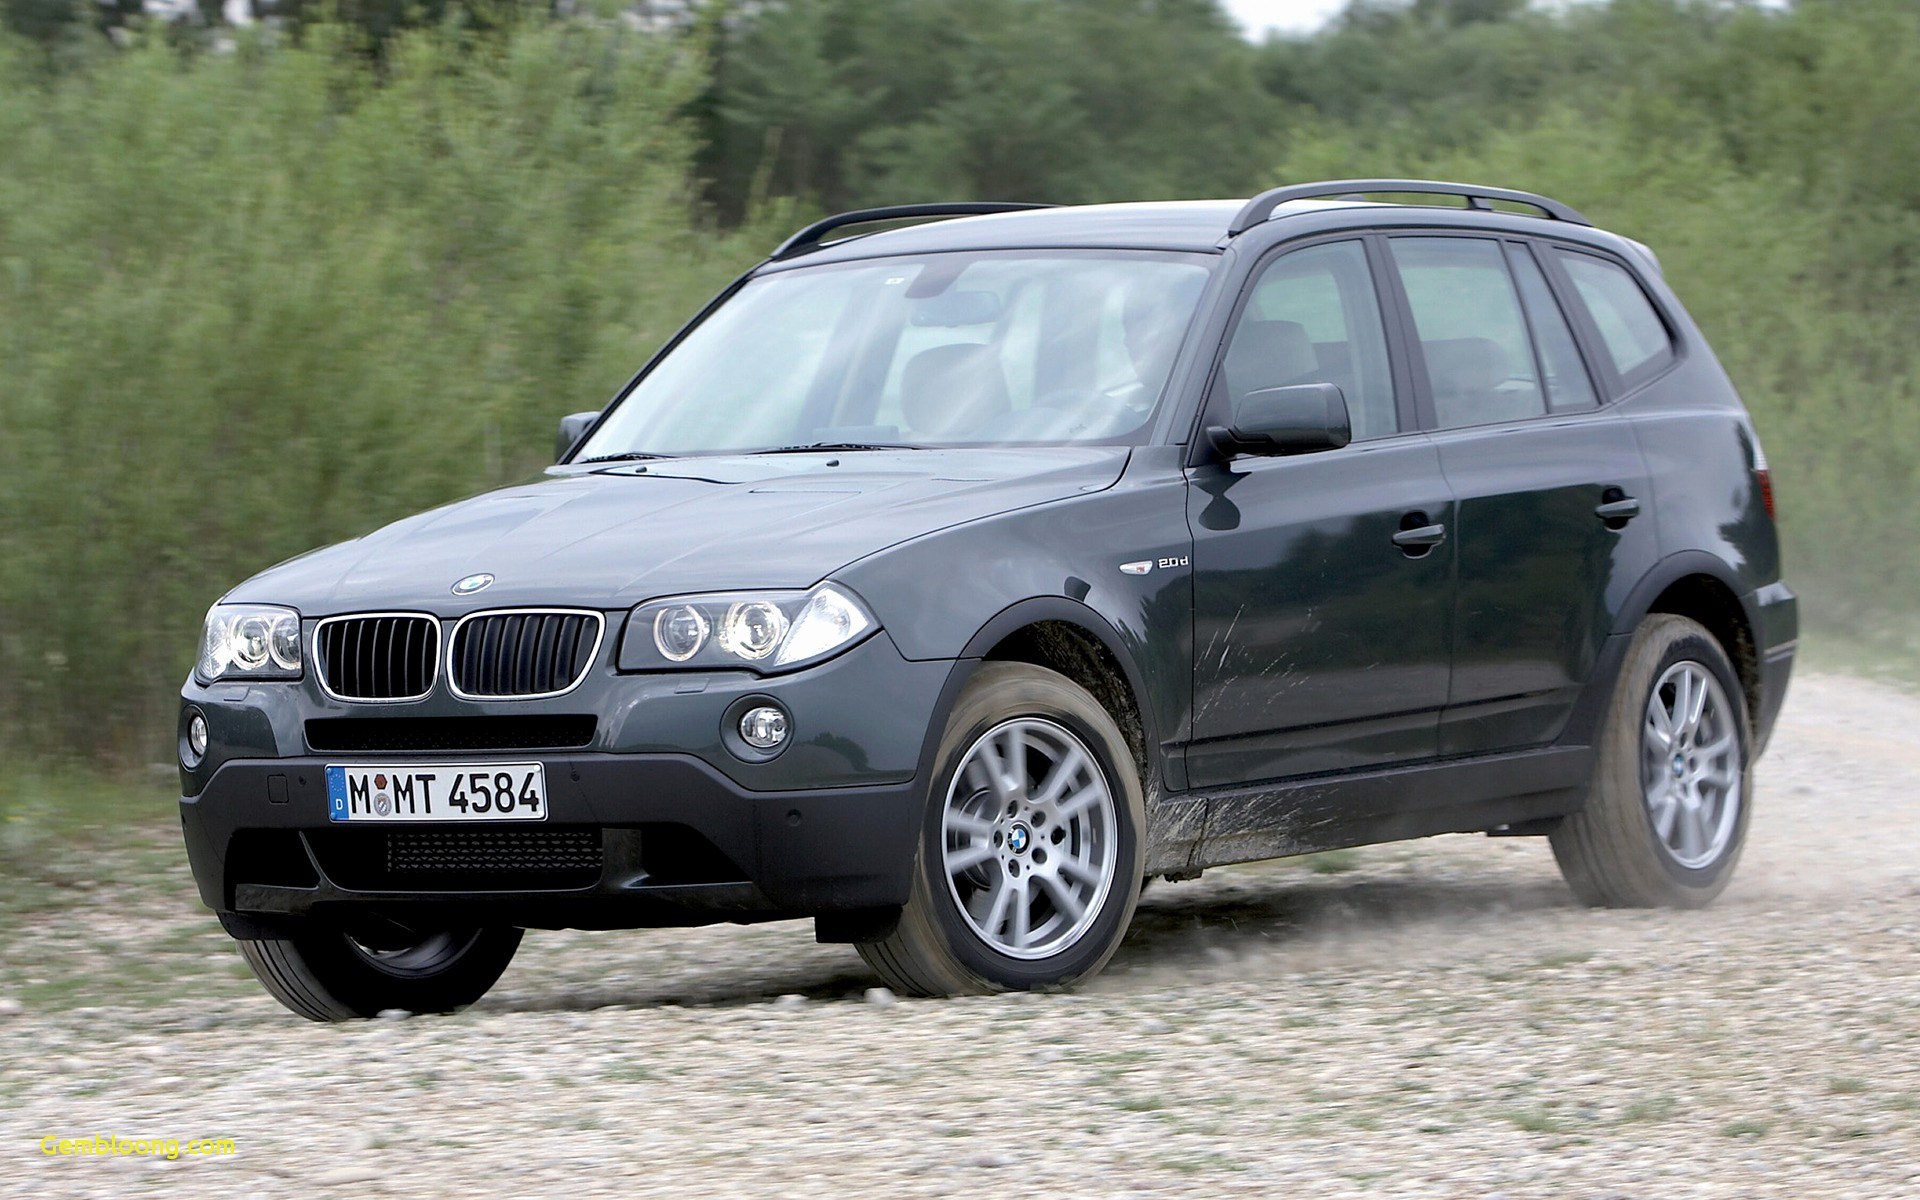 Hd Wallpapers For Android Car Inspirational Bmw Wallpaper - Bmw X3 2.0 D , HD Wallpaper & Backgrounds